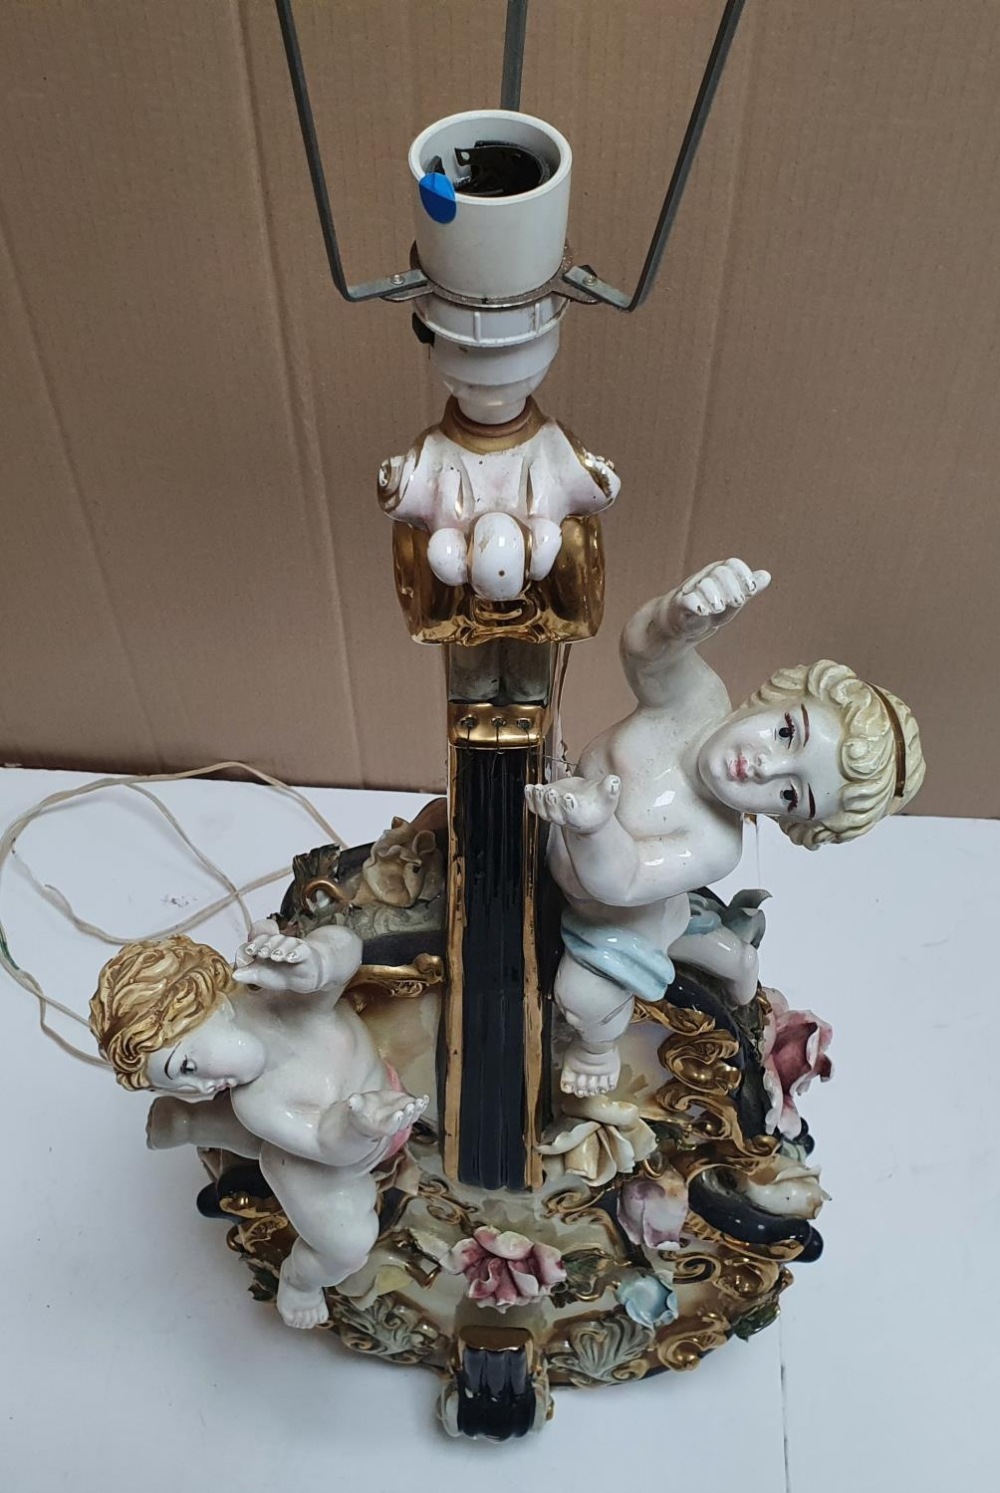 Stunning tall, ornate ceramic table lamp featuring a violin & Cherubs, 72 cm tall, minor losses' - Image 5 of 5